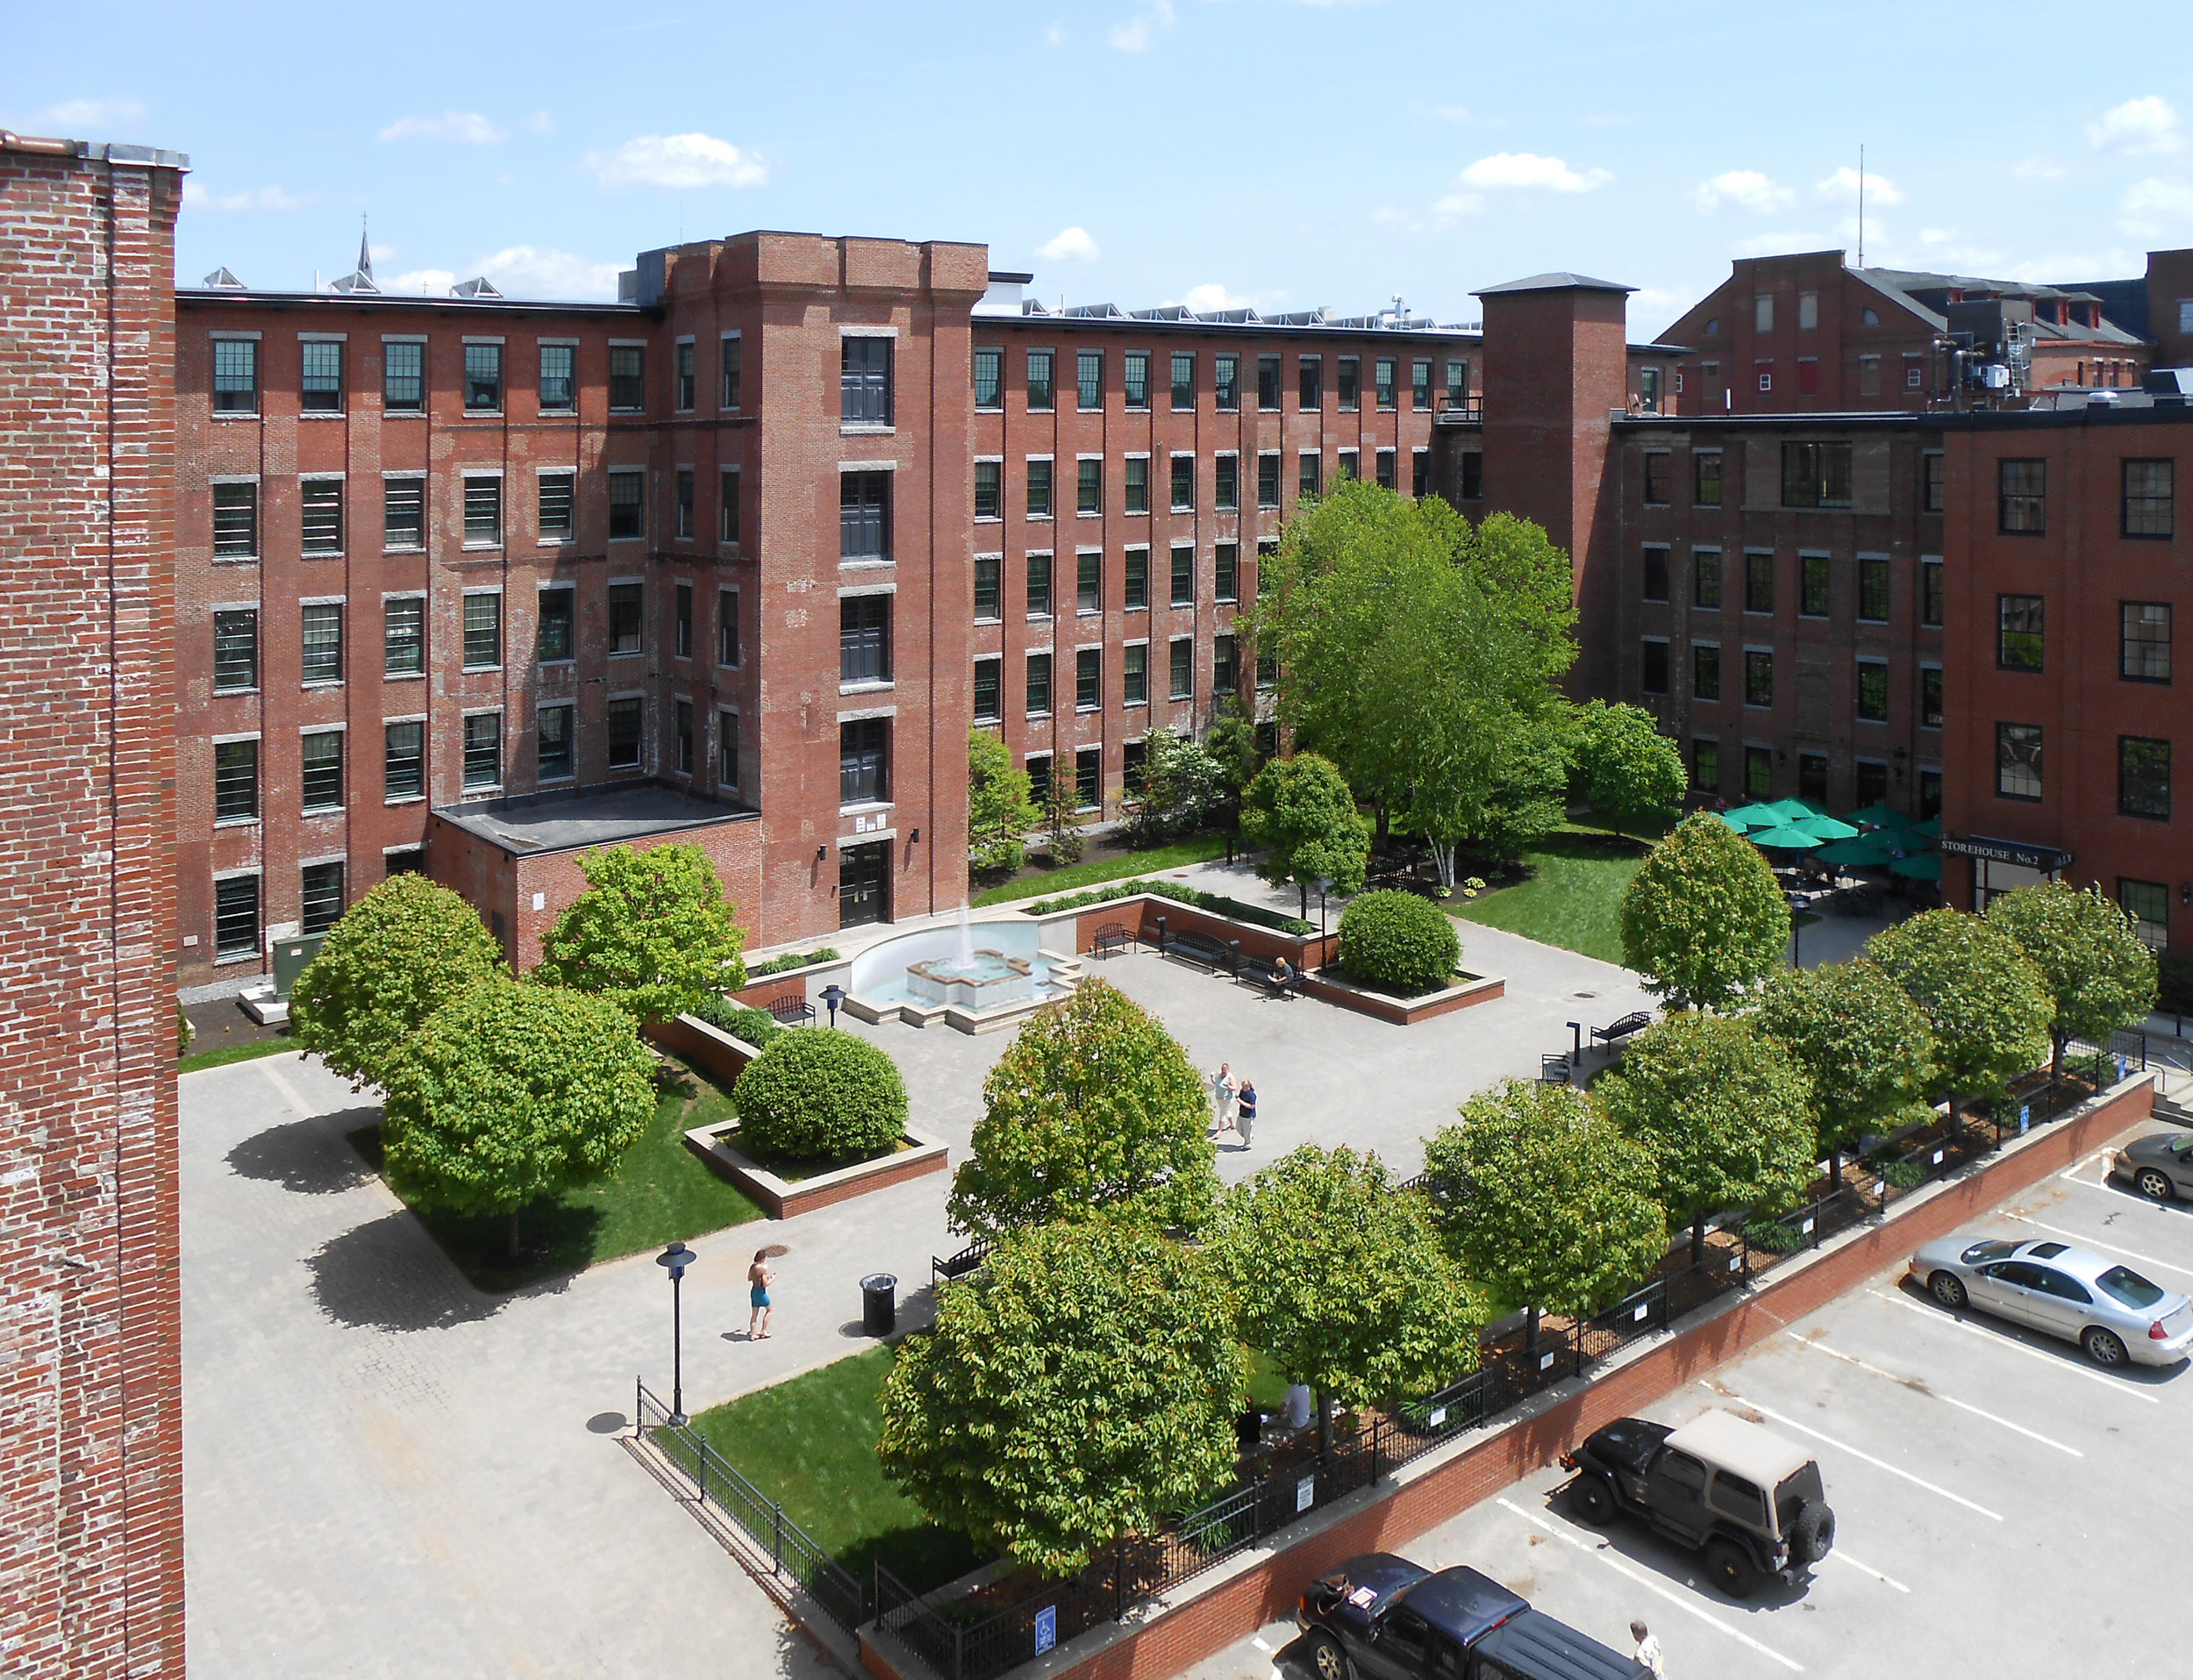 After - Fountain Park from roof of Storehouse No. 7.jpg